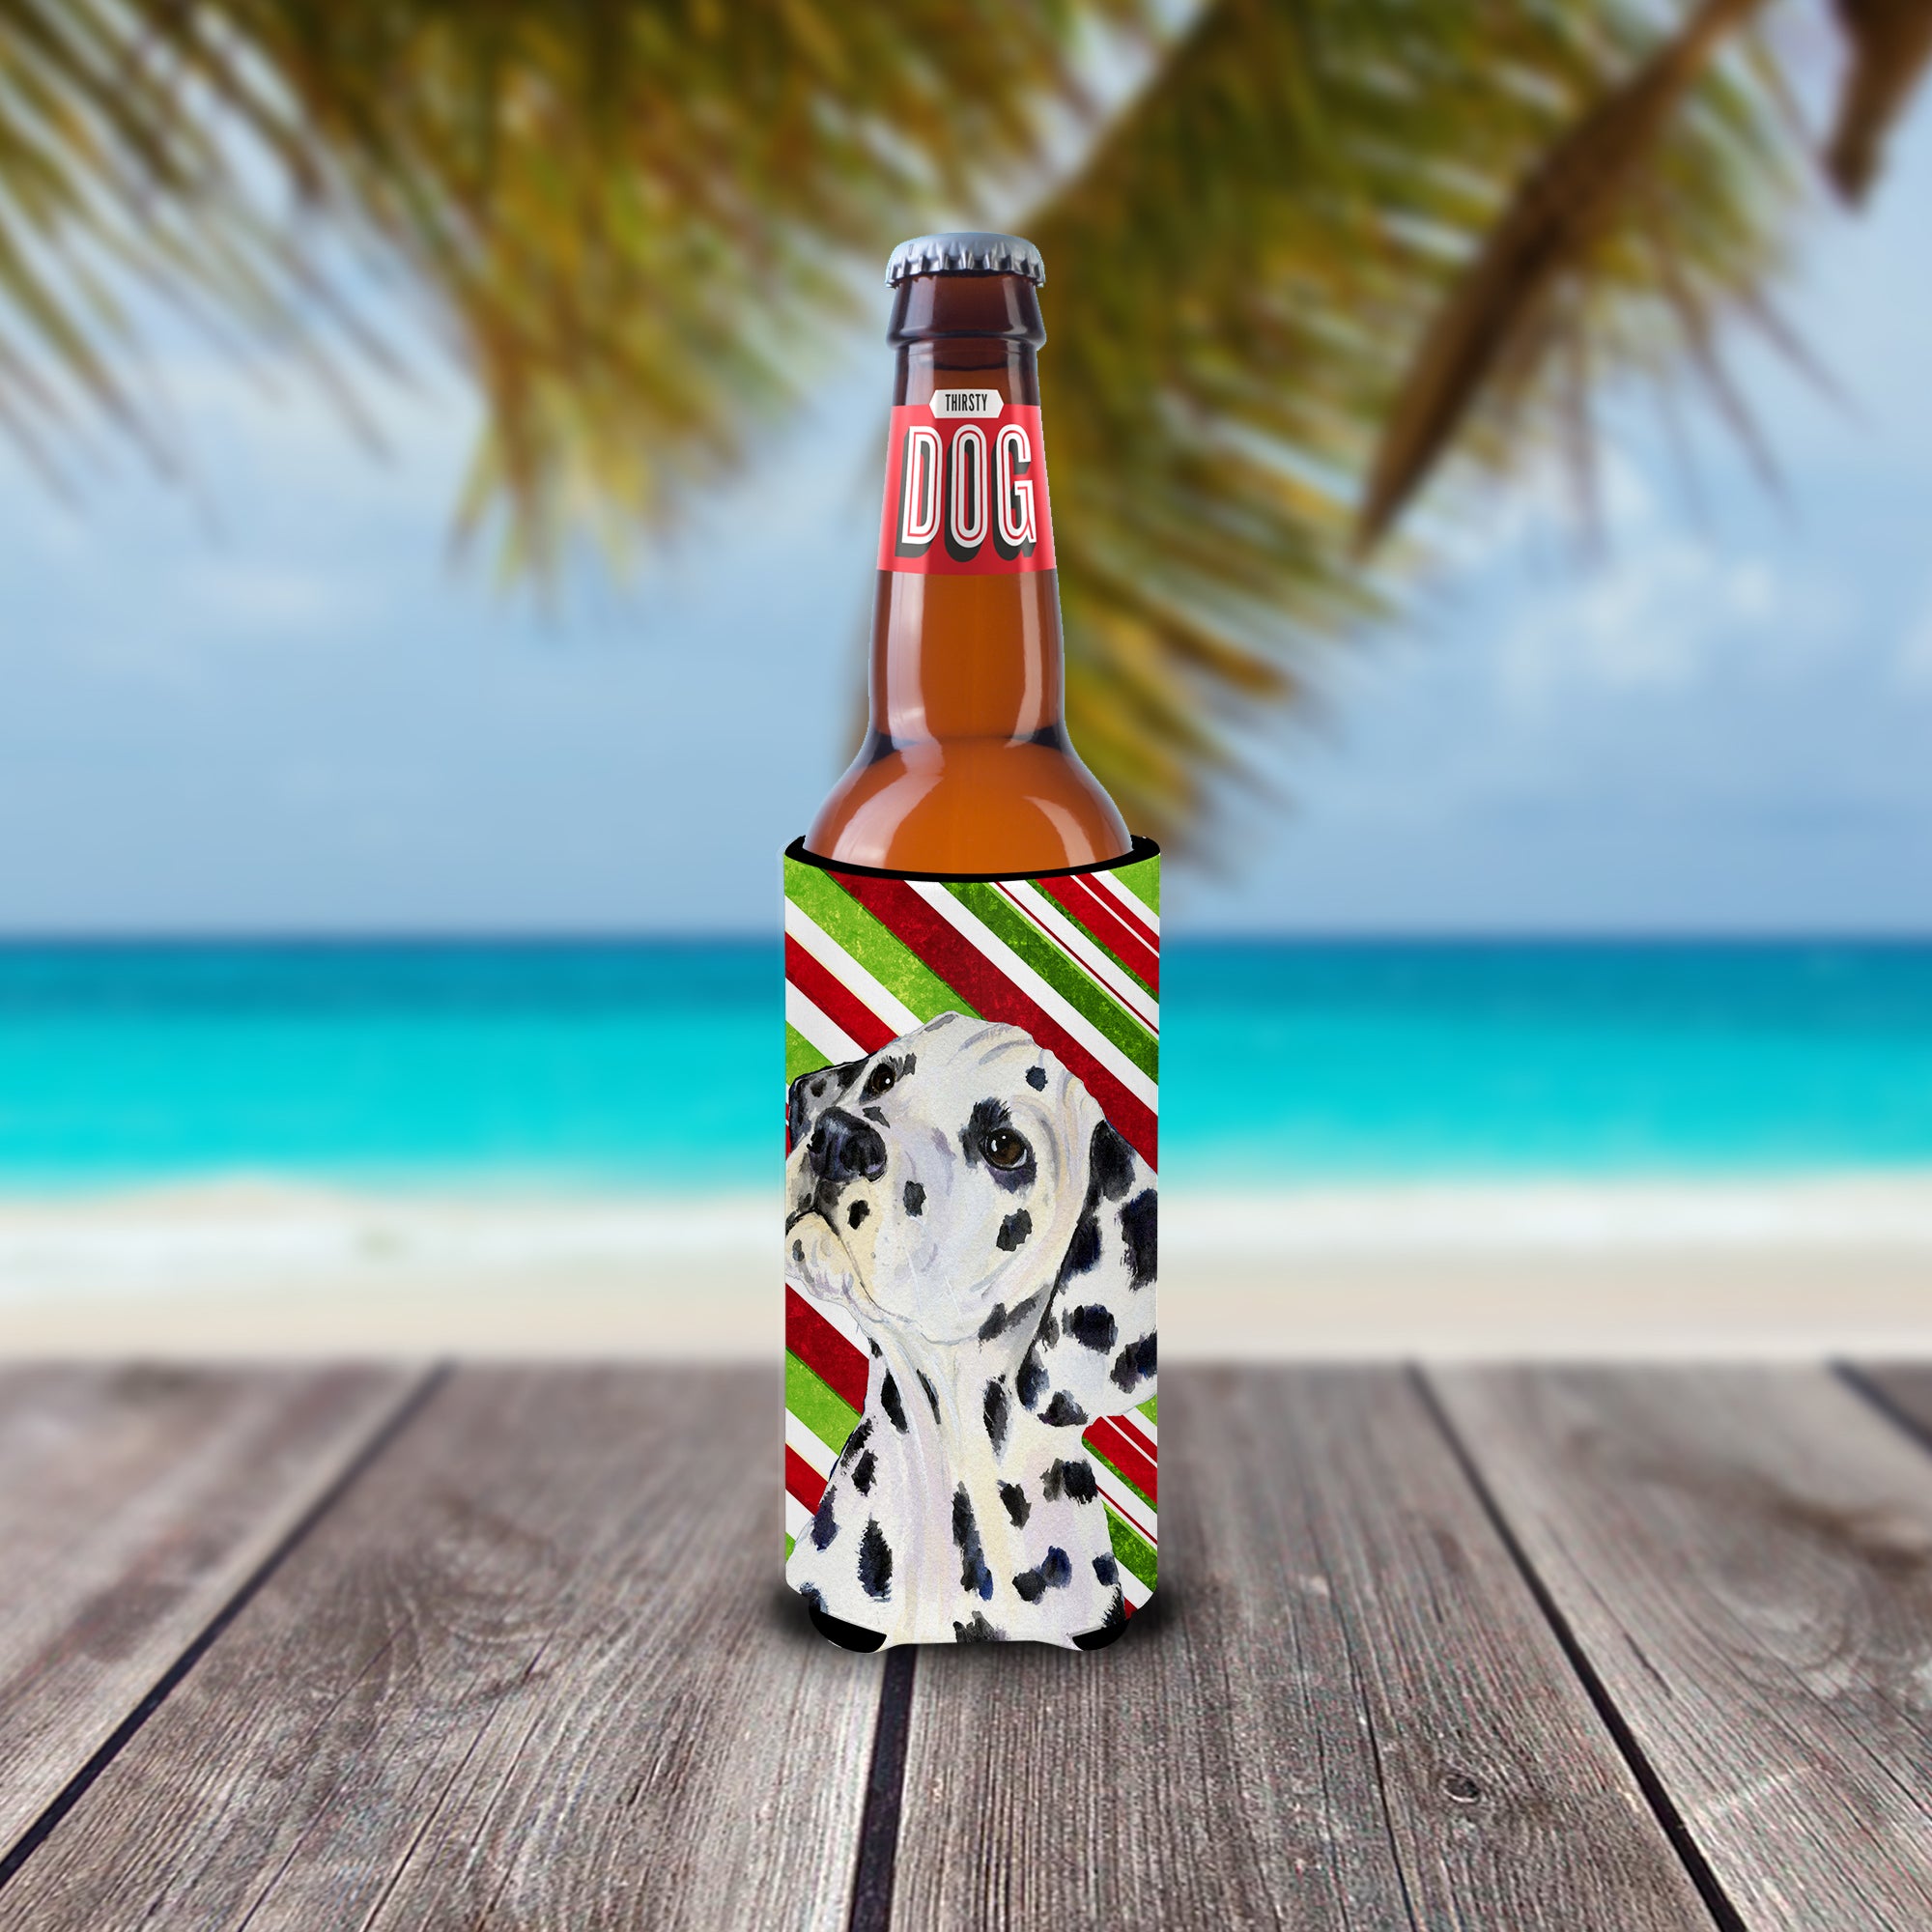 Dalmatian Candy Cane Holiday Christmas Ultra Beverage Insulators for slim cans SS4561MUK.